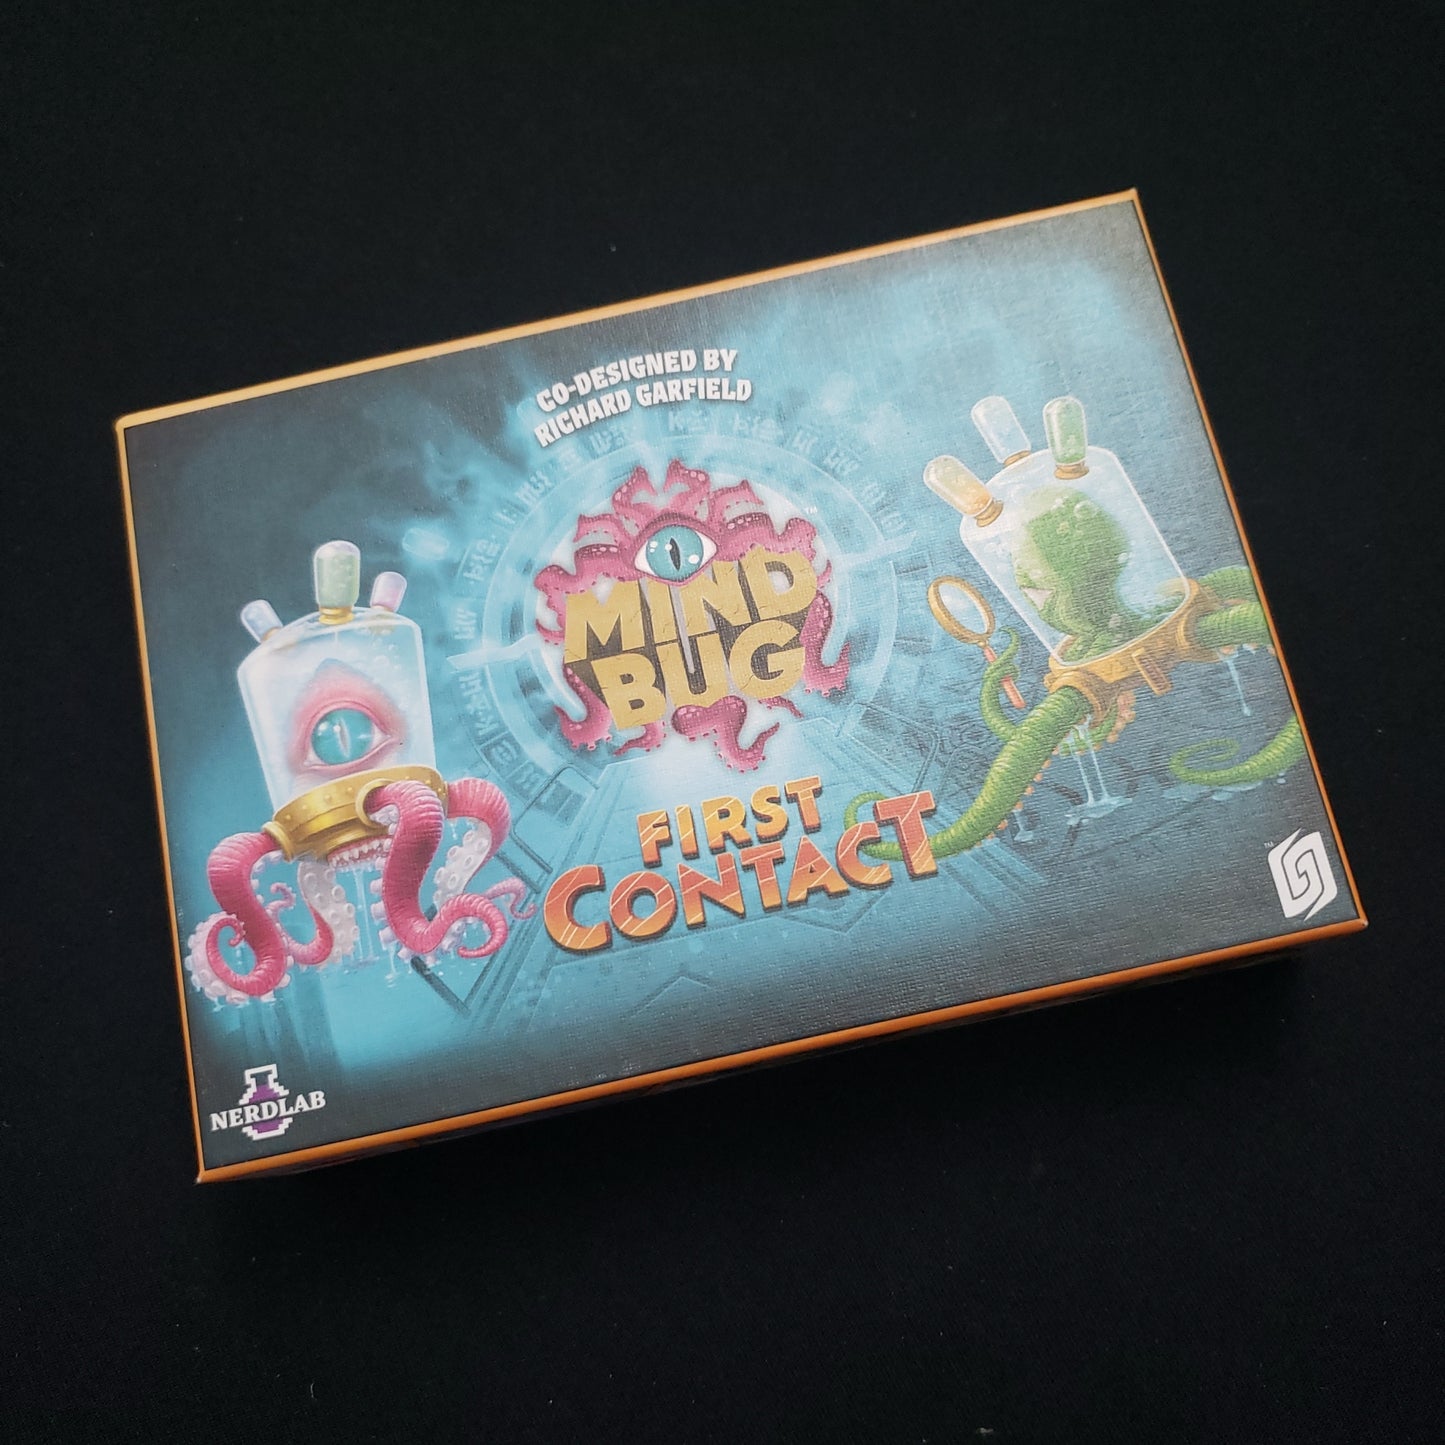 Image shows the front cover of the box of the Mindbug: First Contact card game